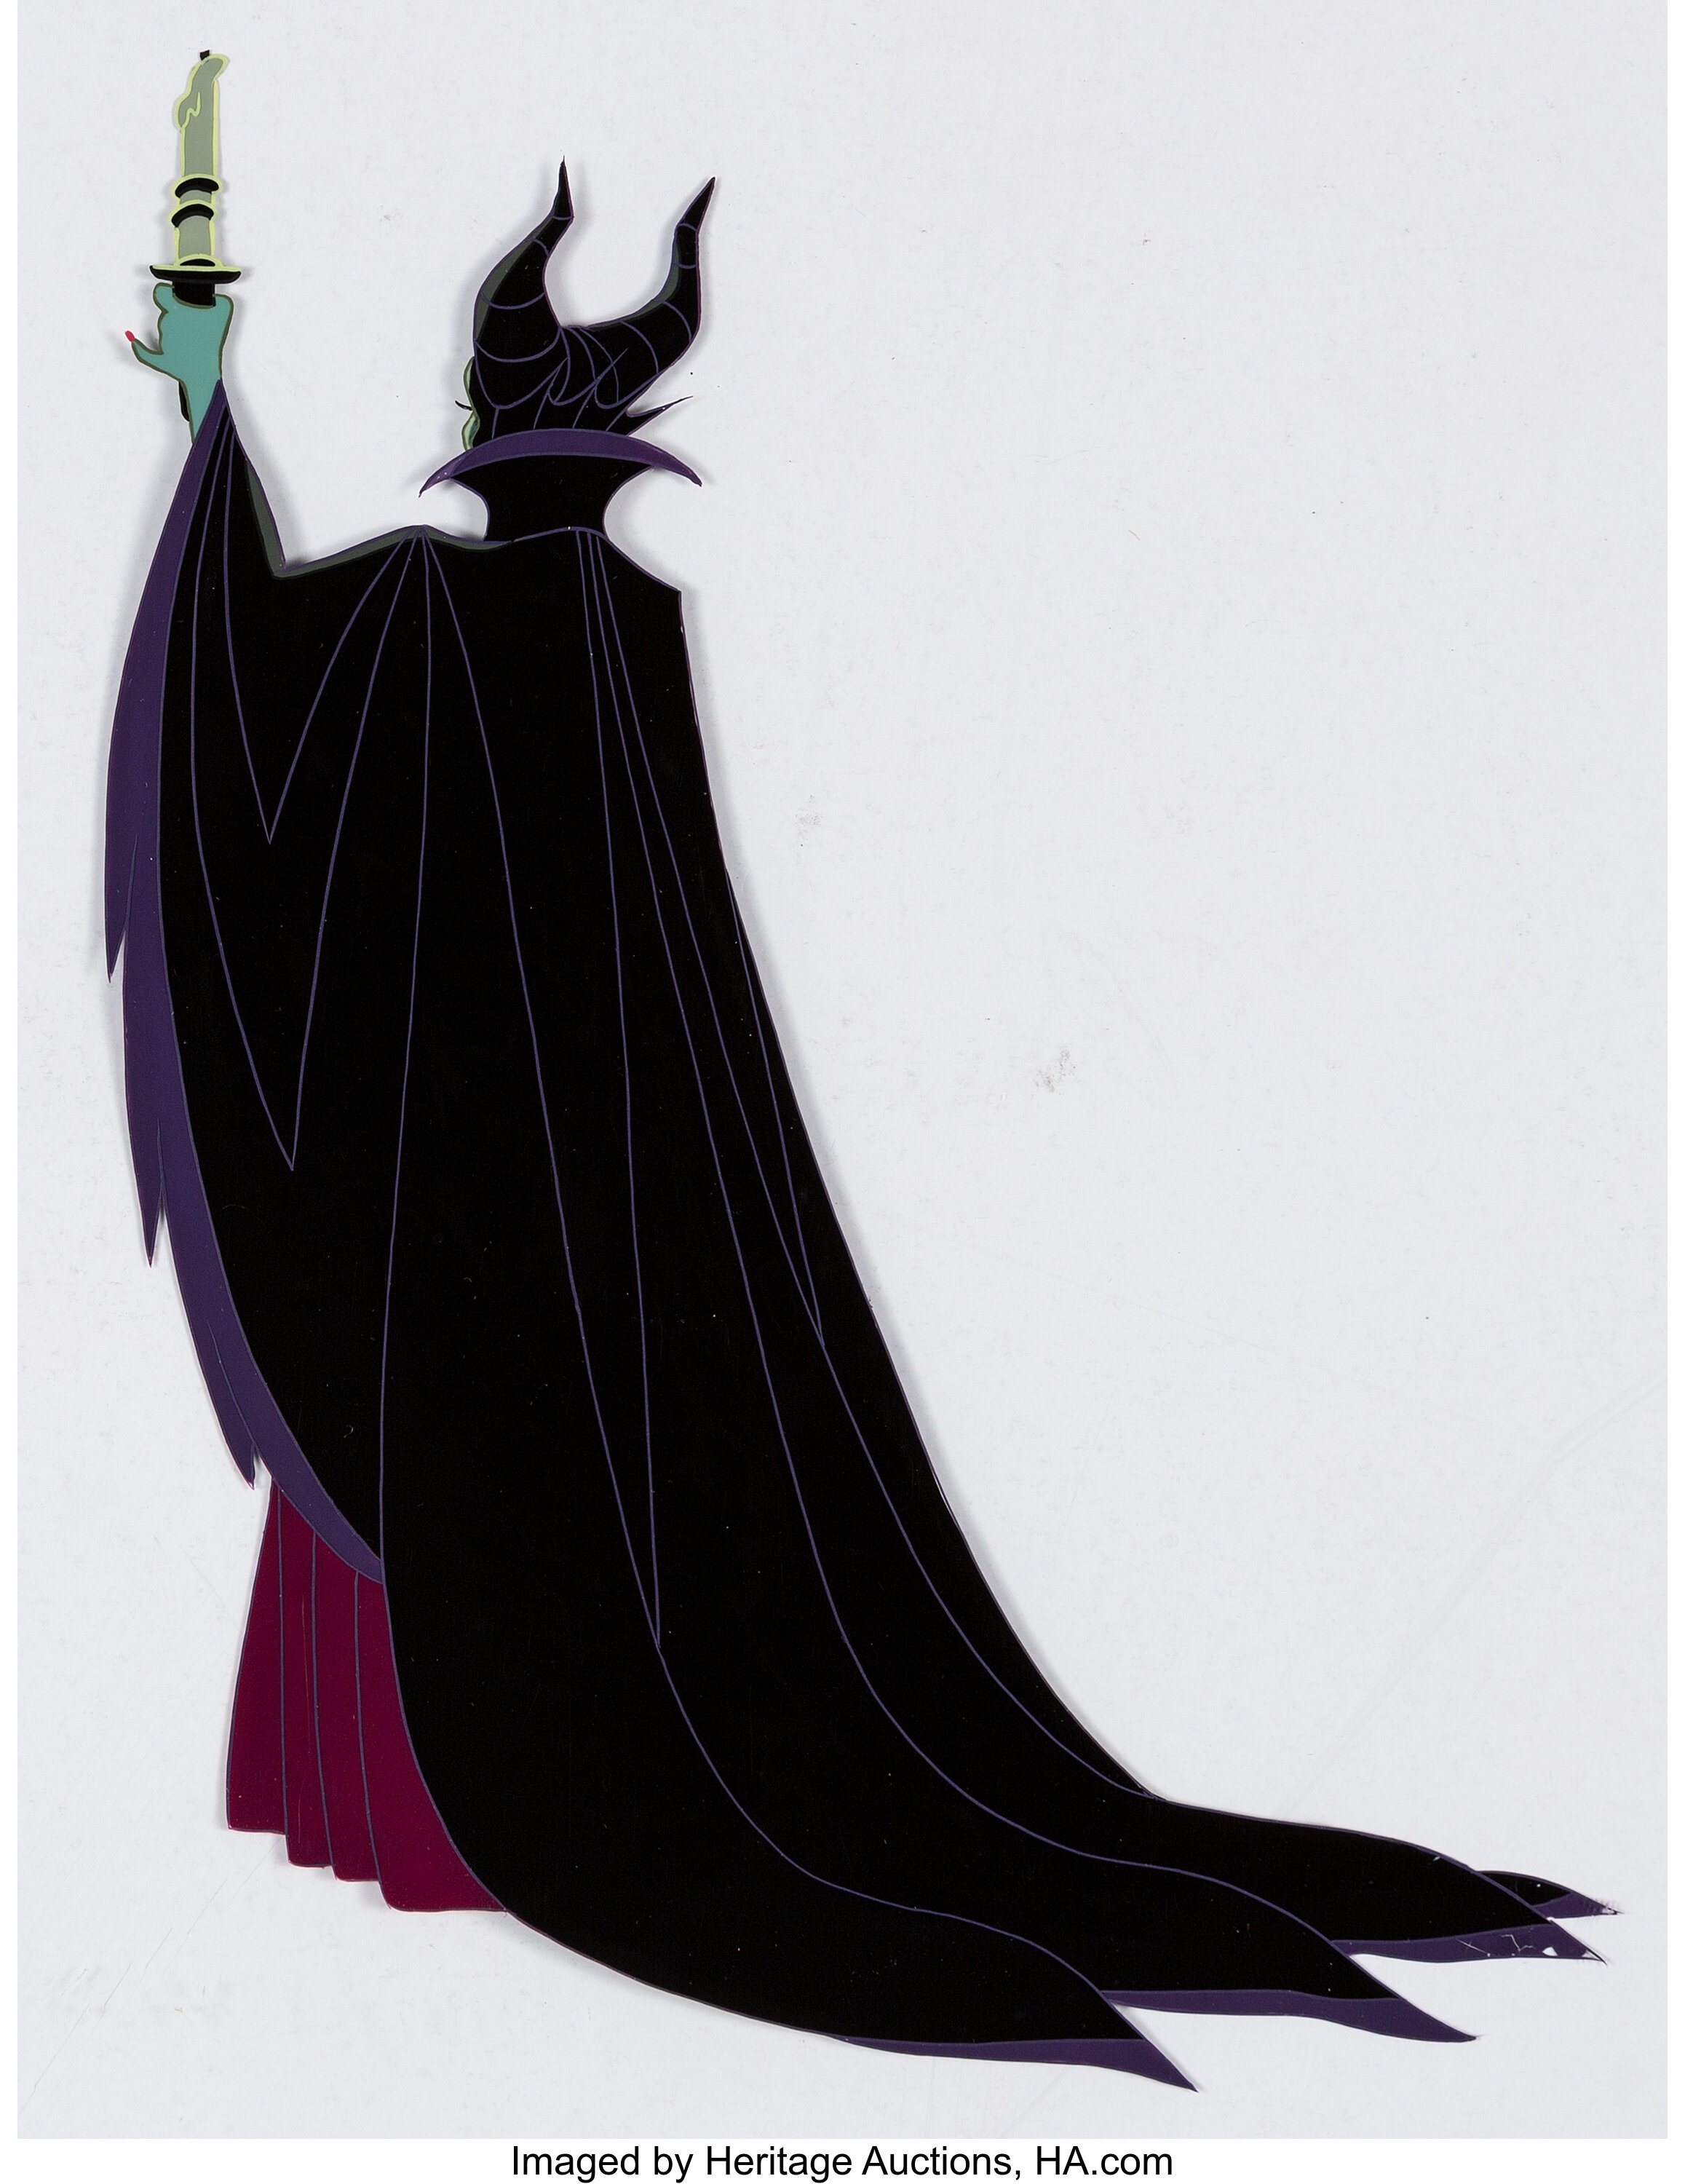 Throwback Thursday to 1959: Disney Pictures' Sleeping Beauty Villain  Maleficent